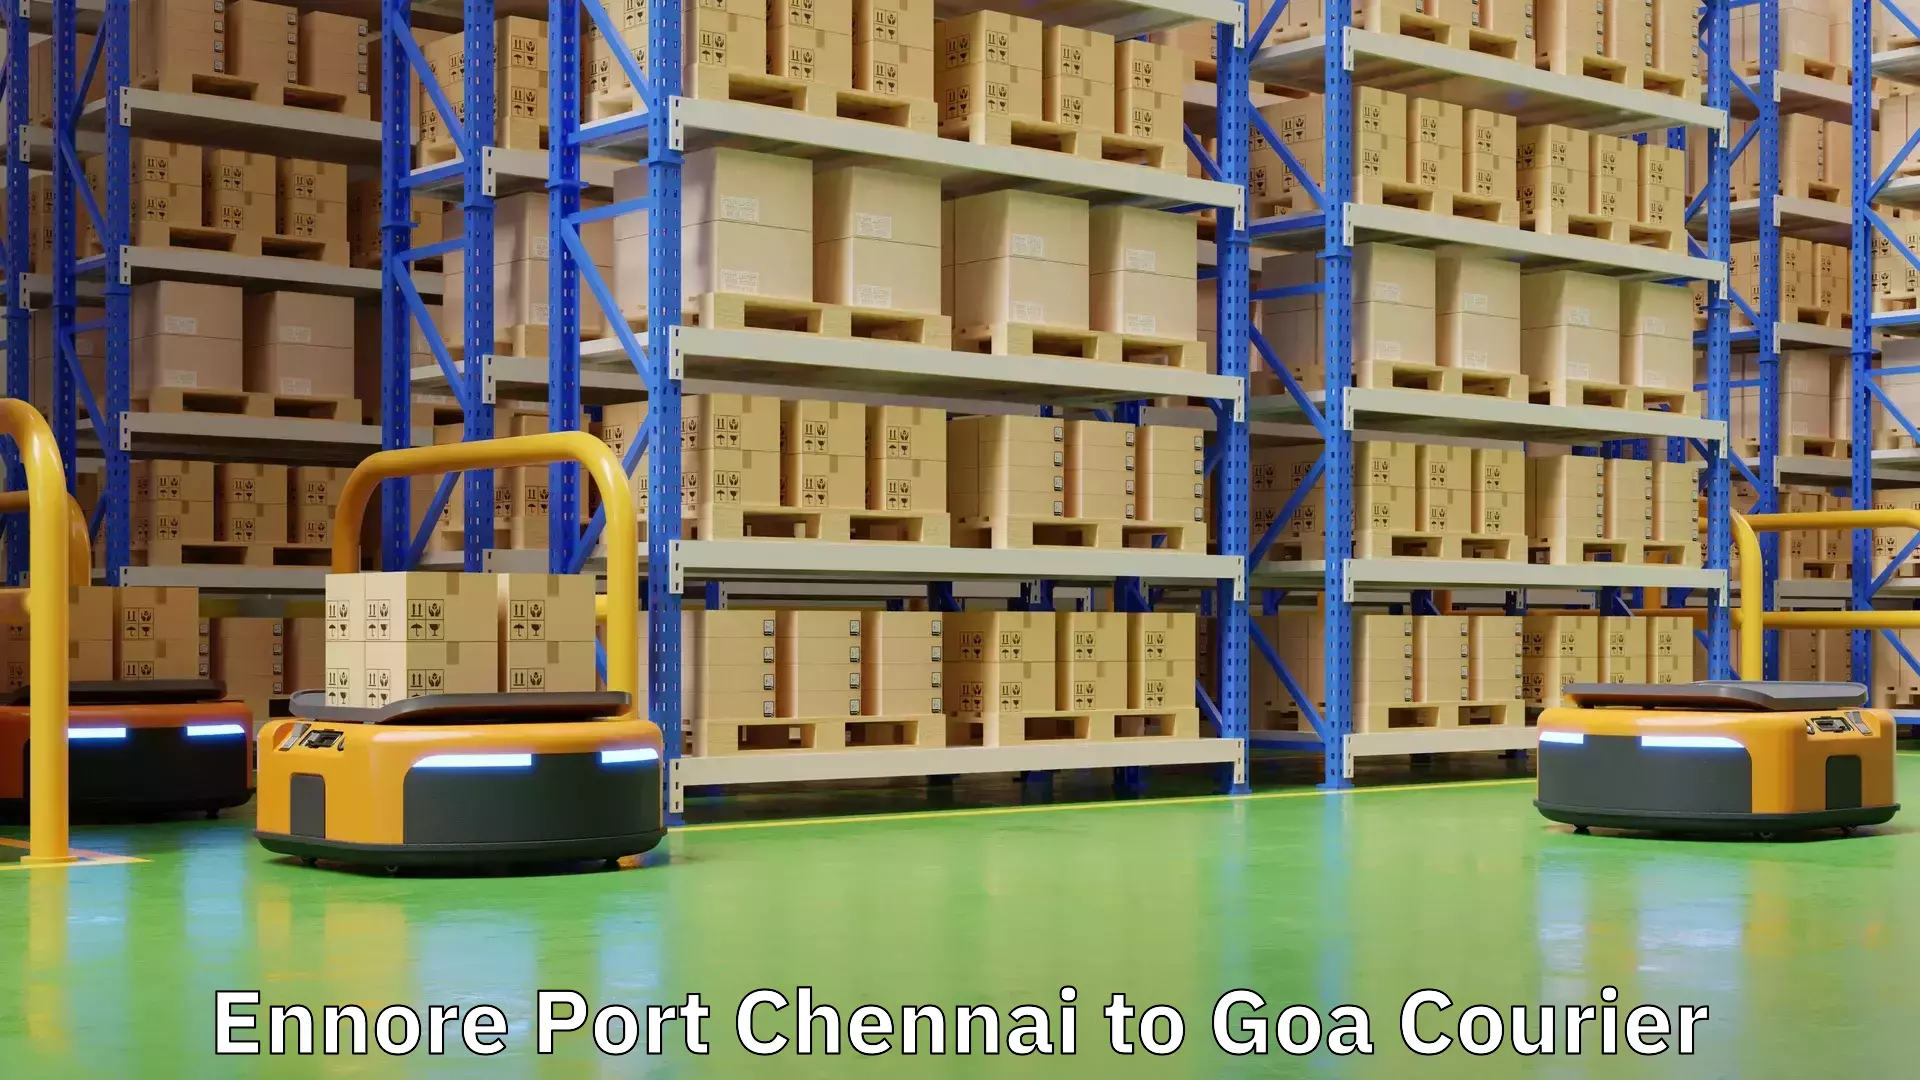 Overnight delivery services Ennore Port Chennai to Goa